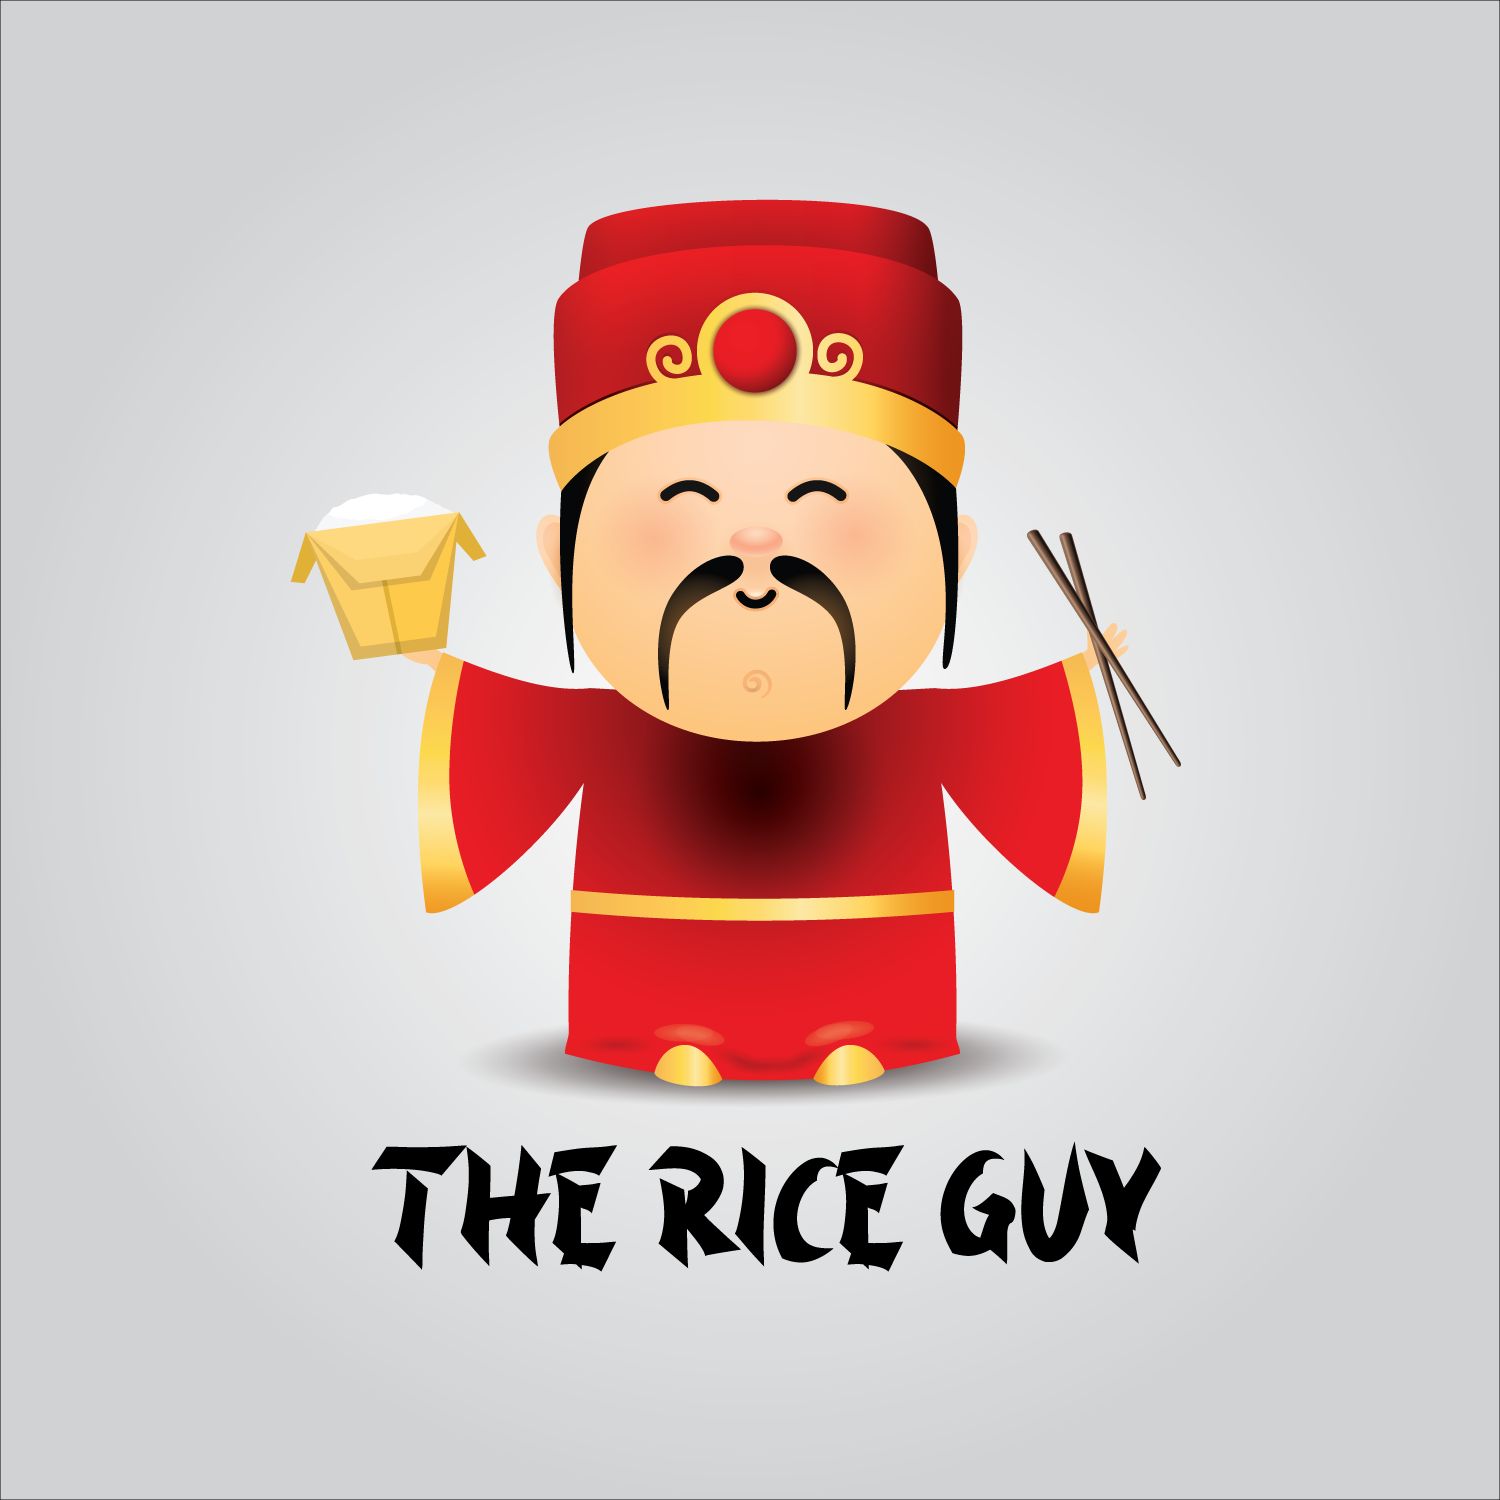 The Rice Guy